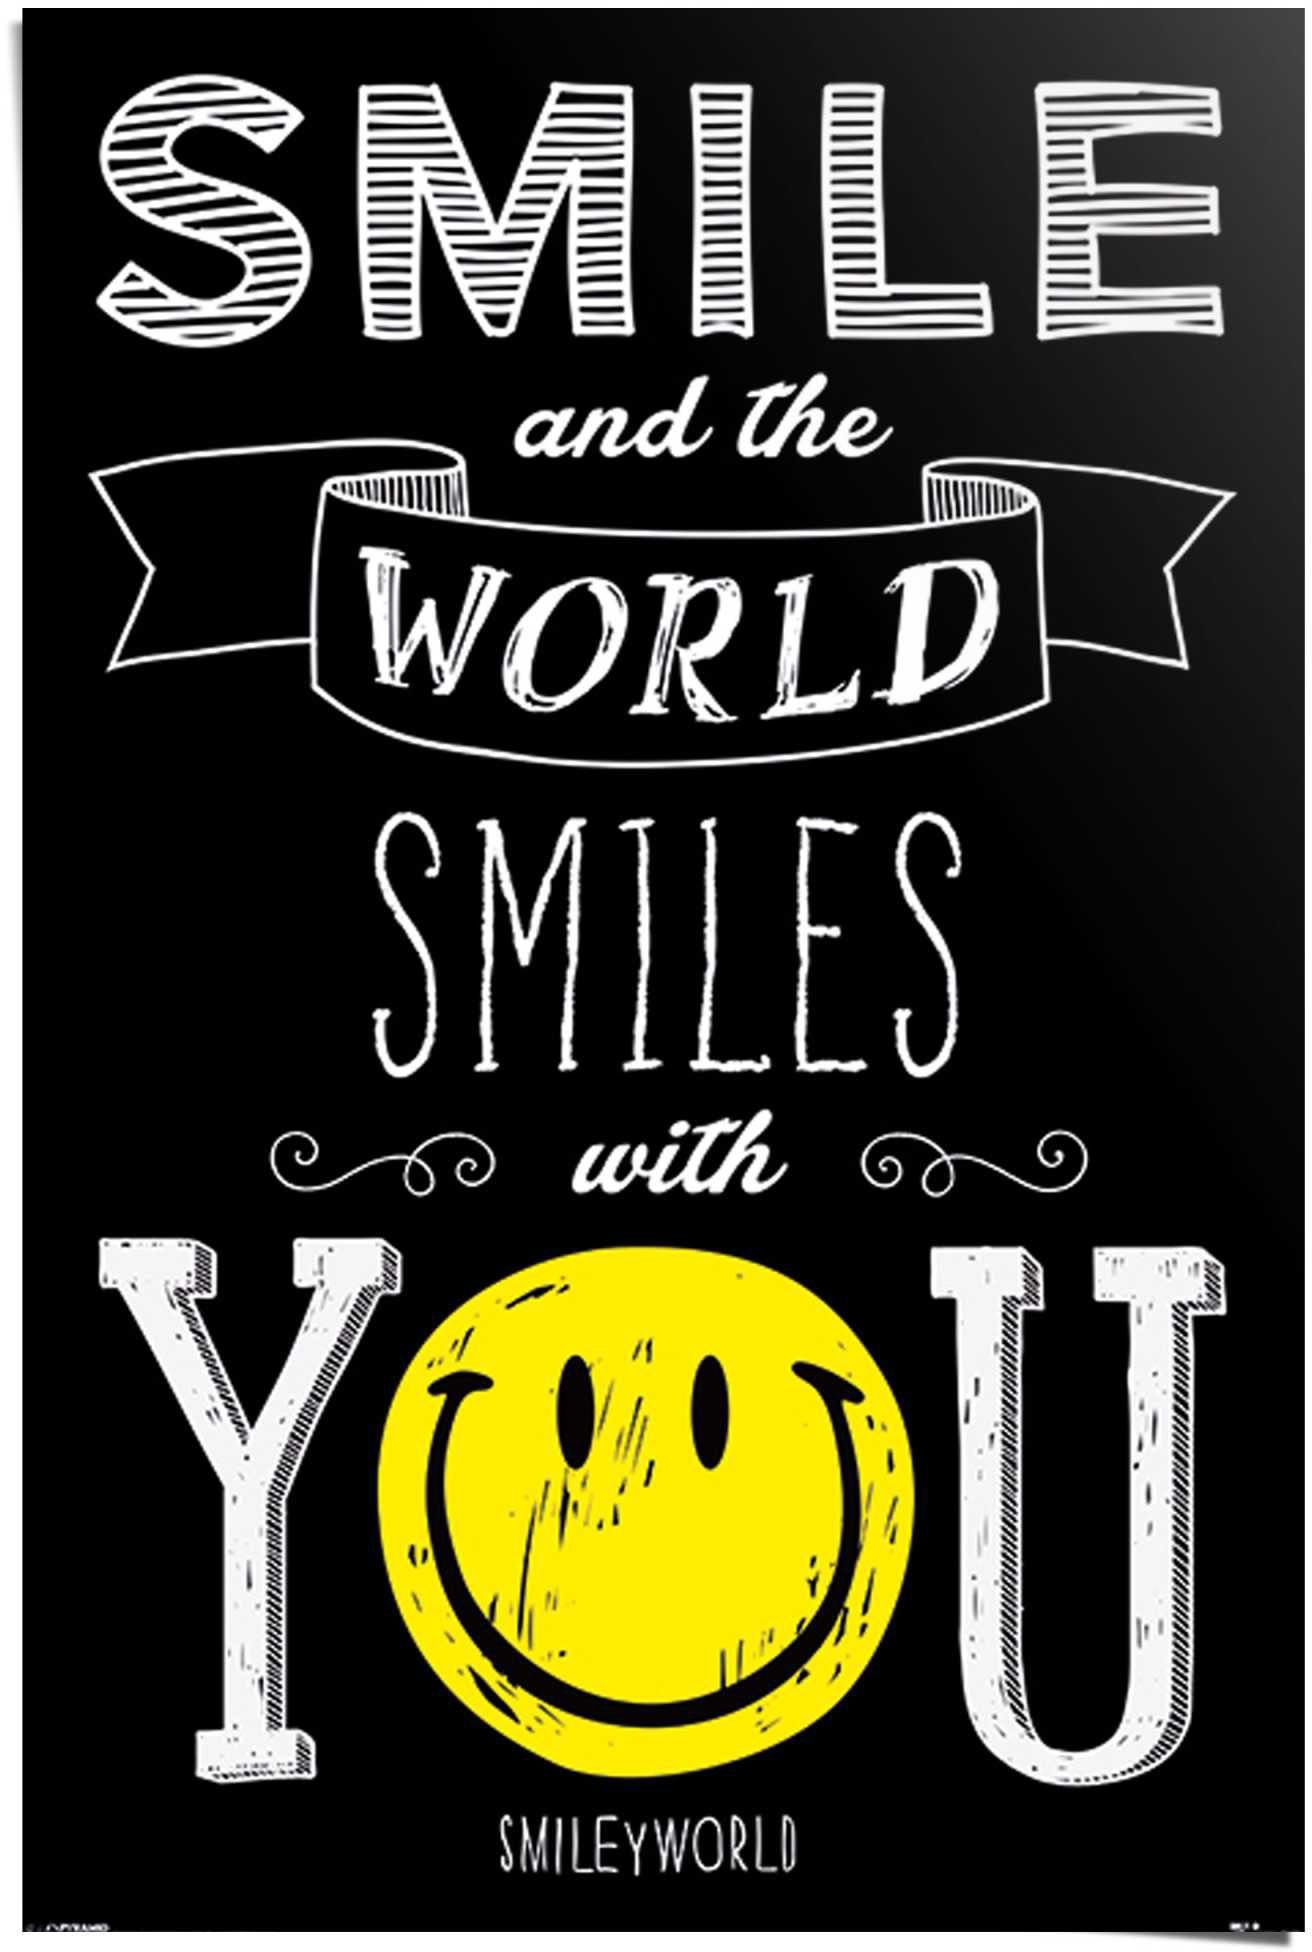 with Poster (1 world smiles Smiley St) you, Reinders!